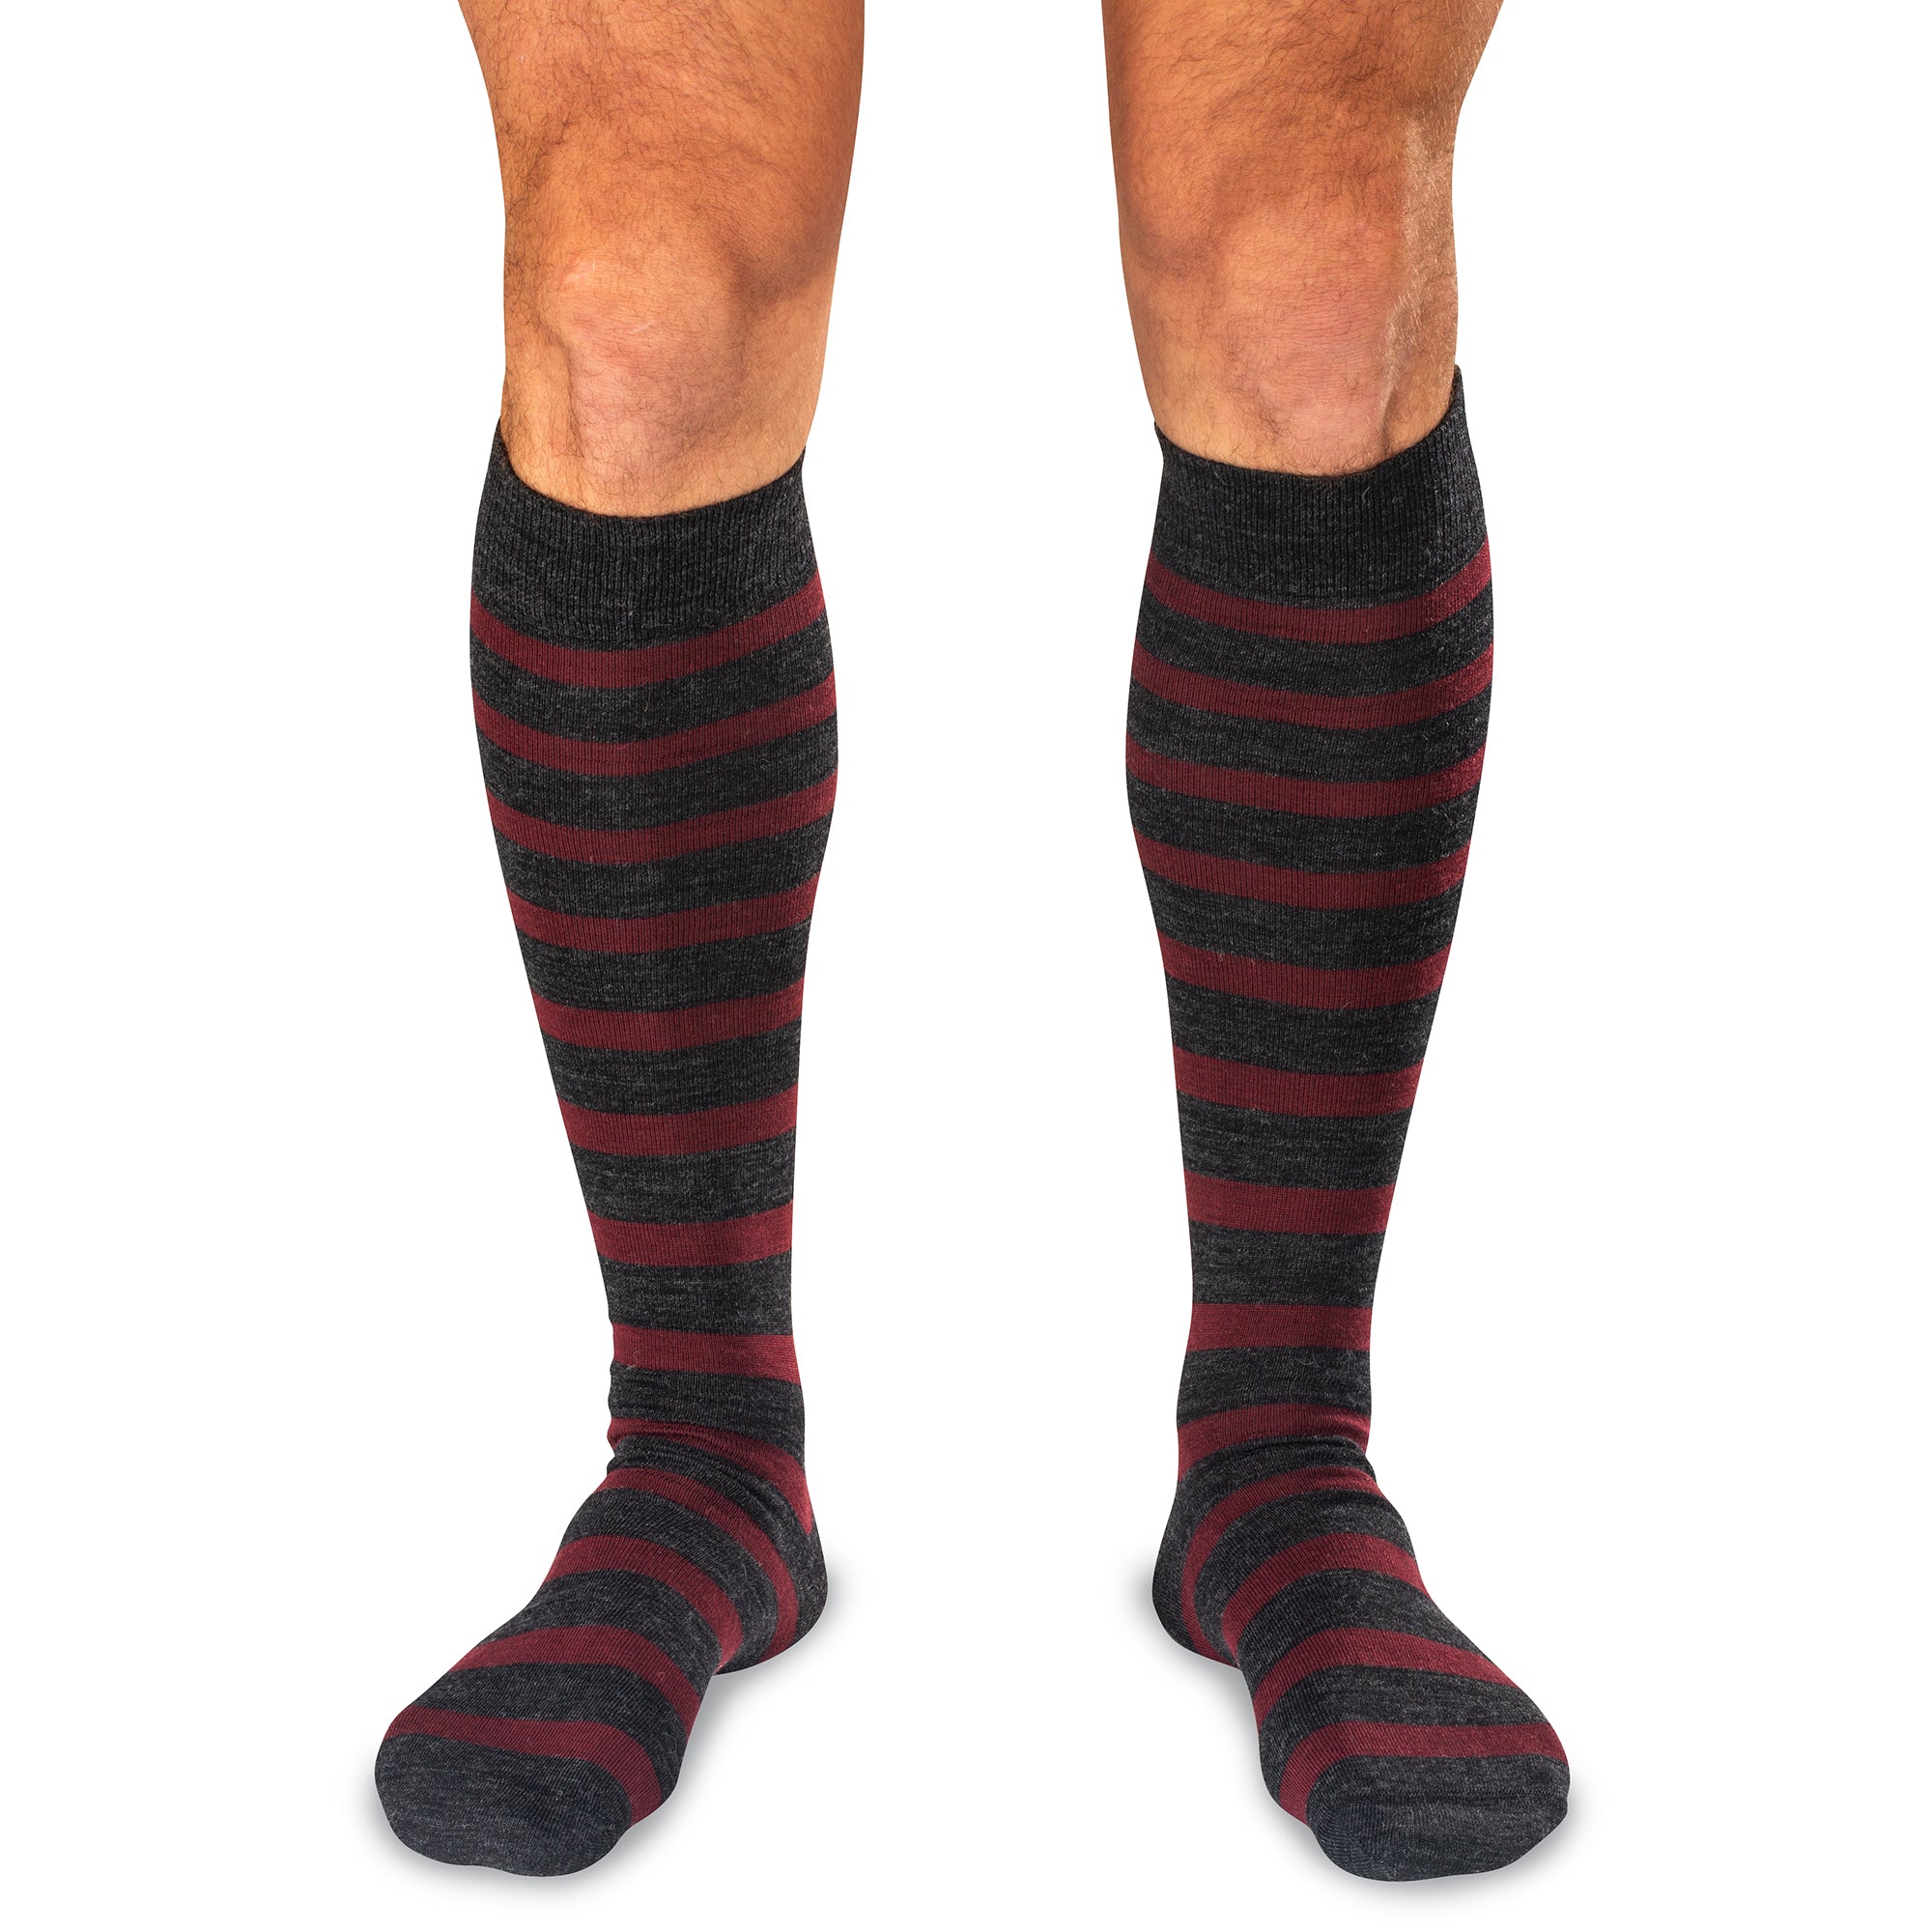 model wearing charcoal and burgundy striped over the calf dress socks